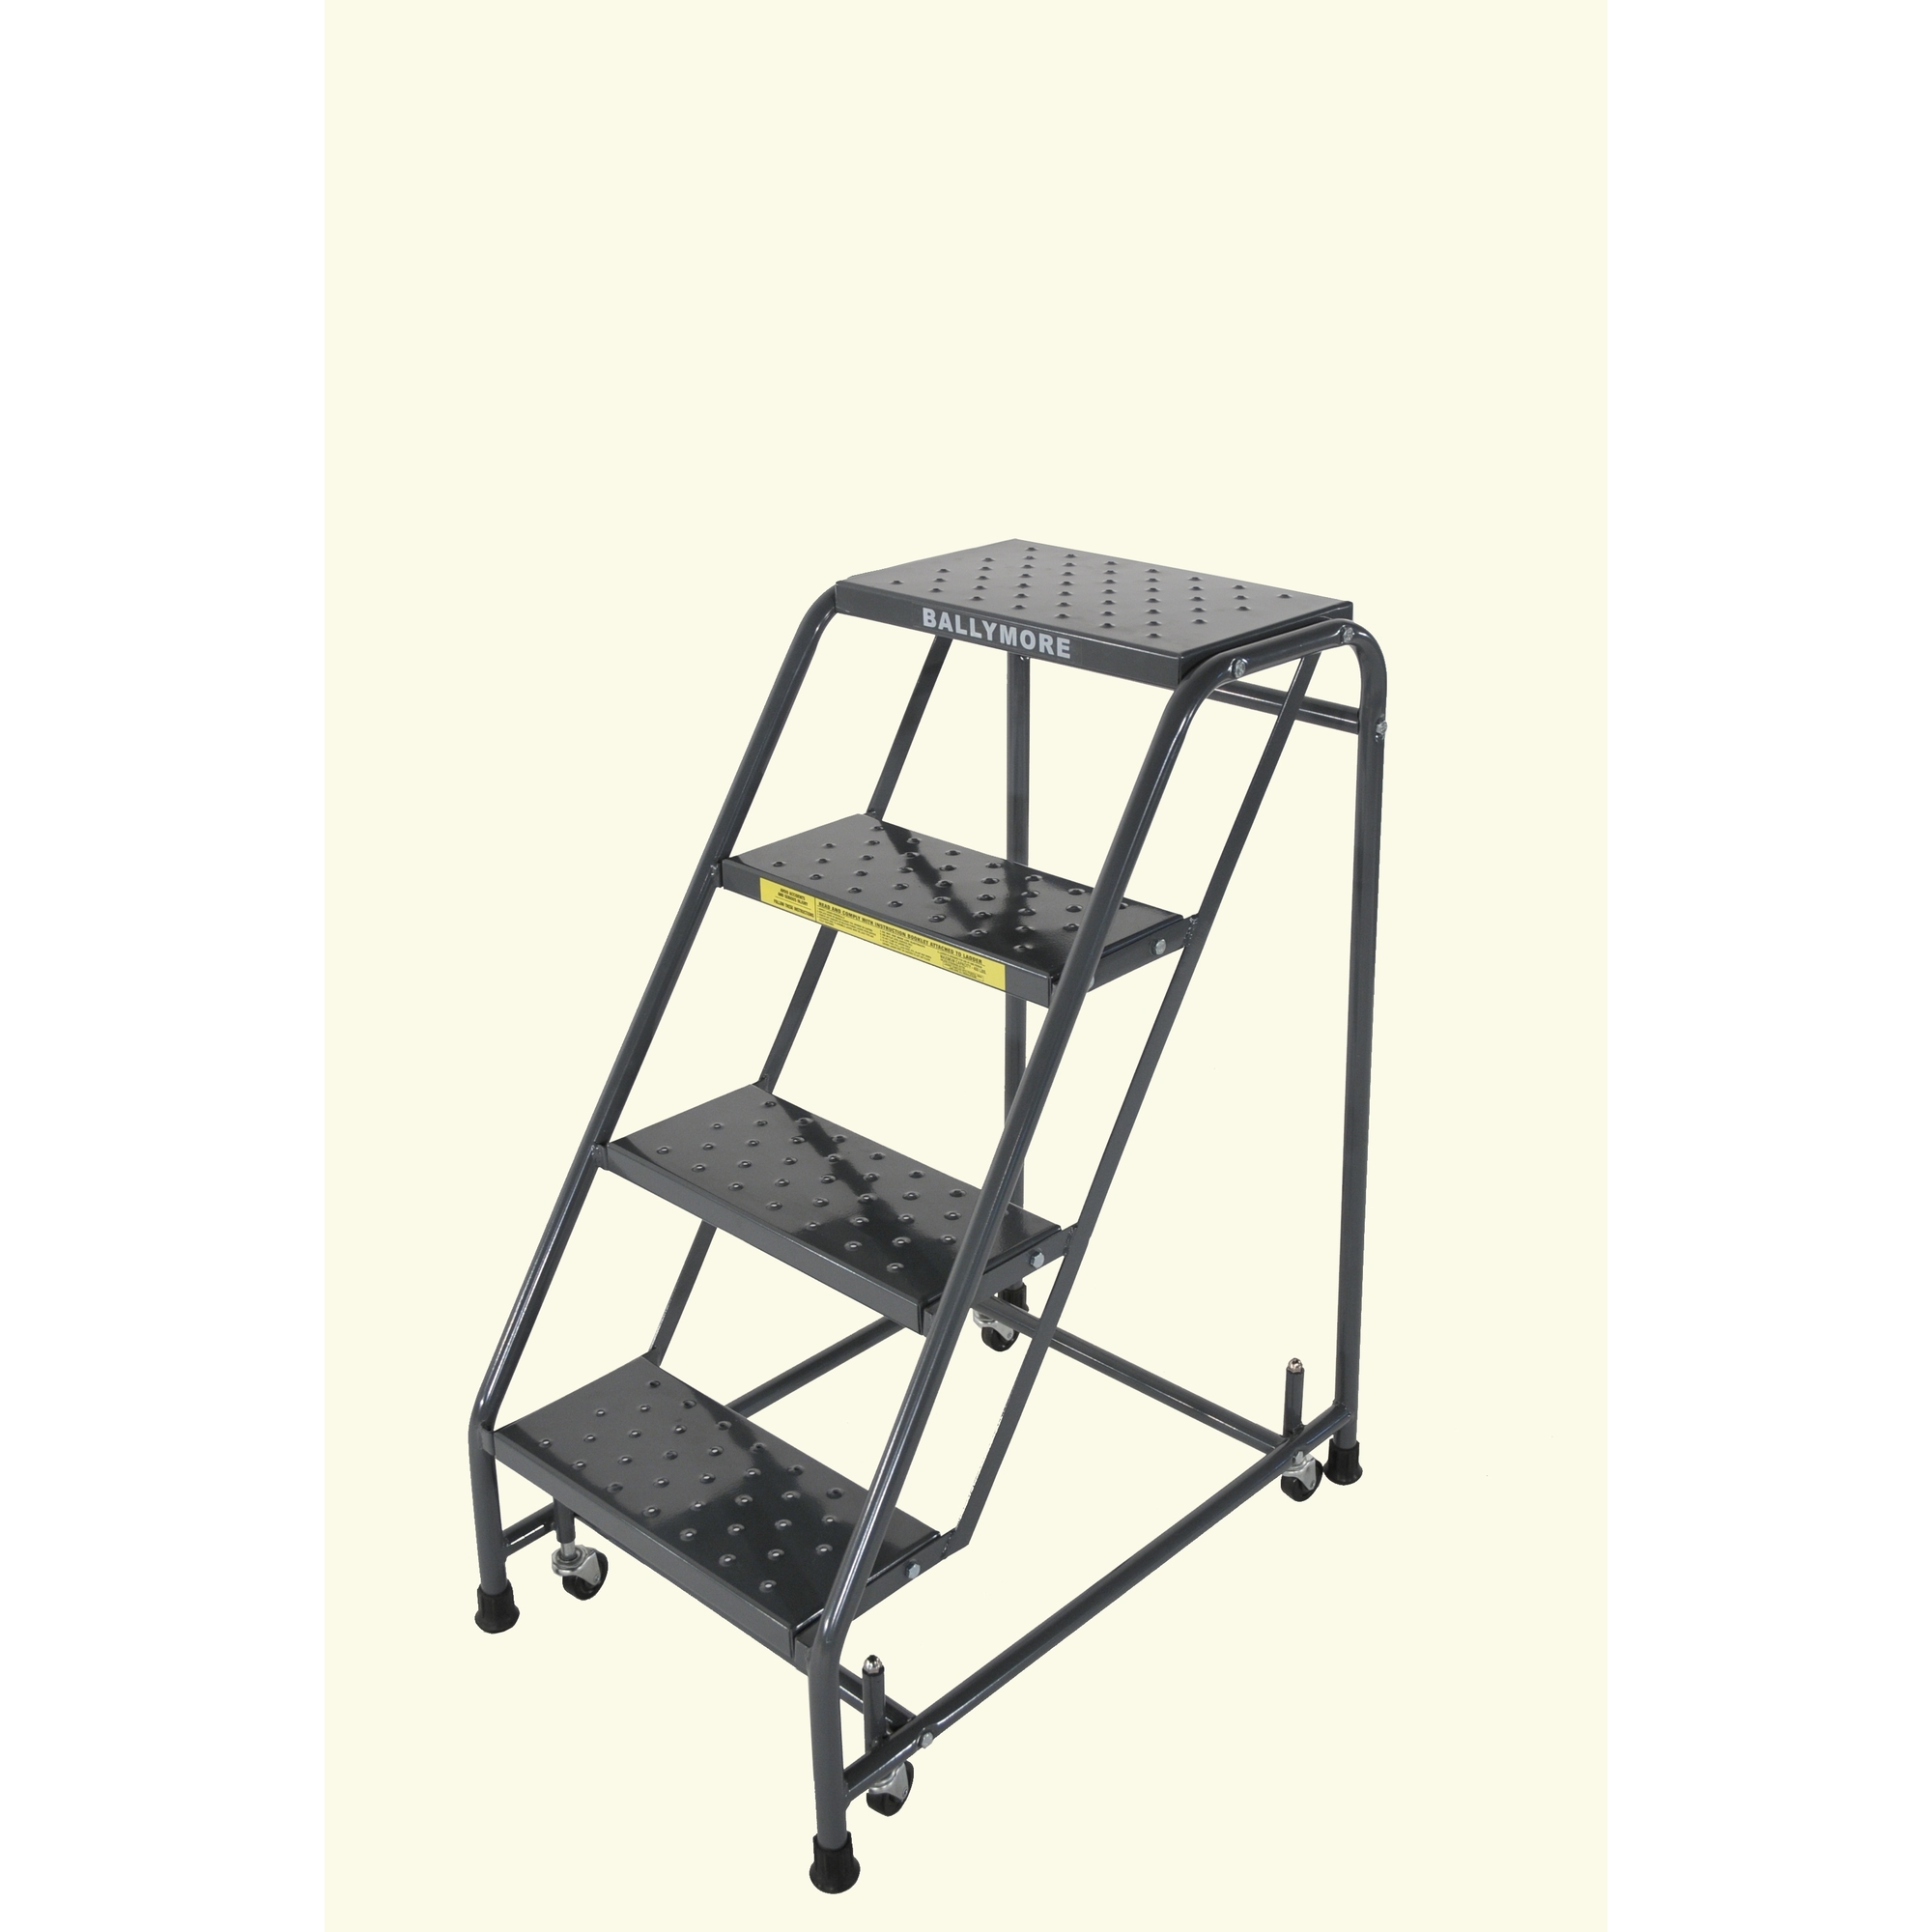 Ballymore, Rolling Ladder, Overall Height 38 in, Steps 4, Material Steel, Model 418P